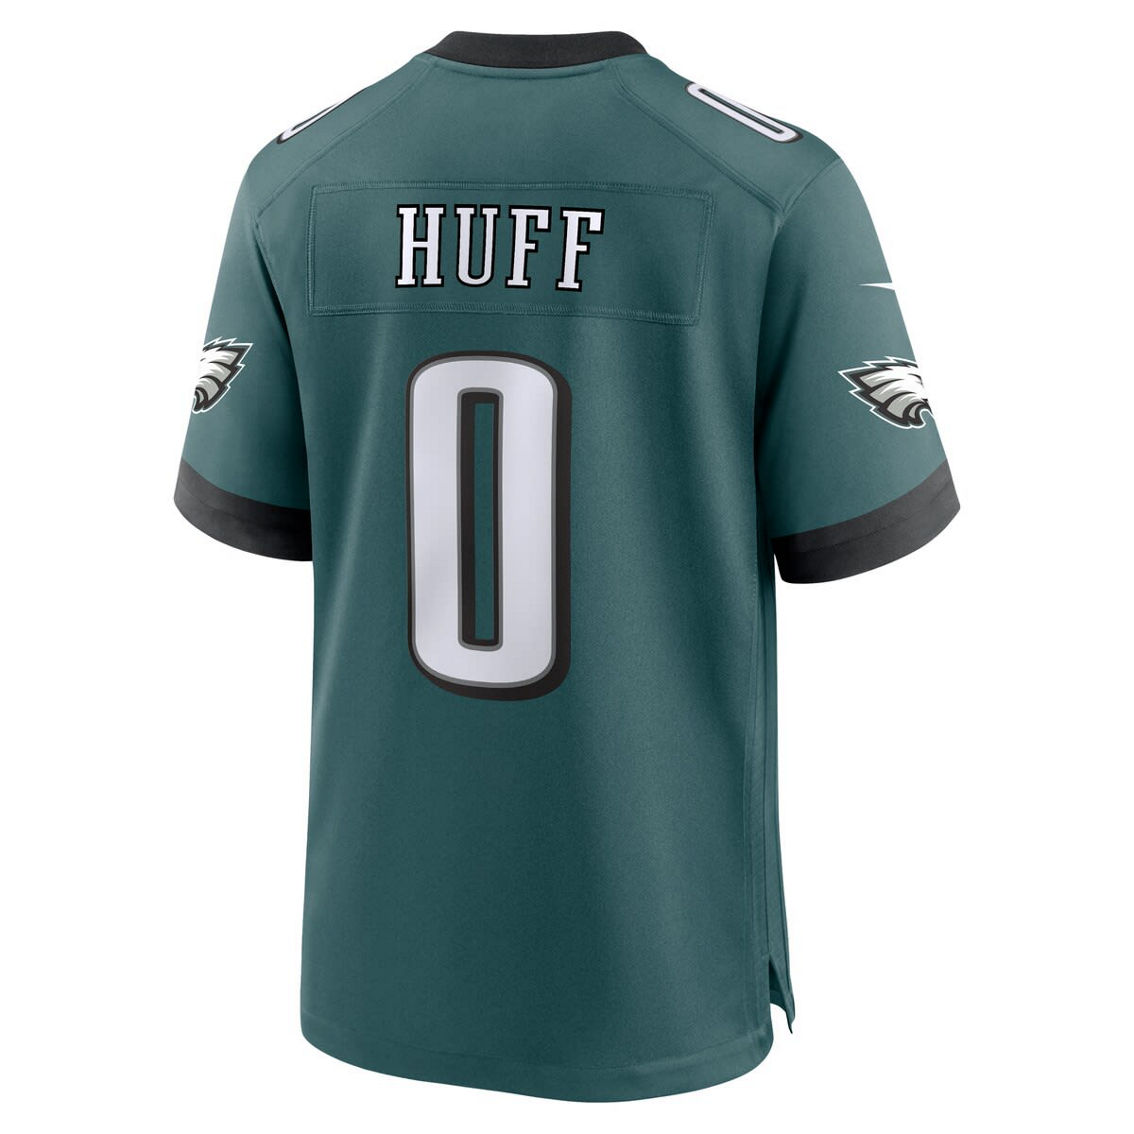 Nike Men's Bryce Huff Midnight Green Philadelphia Eagles Game Player Jersey - Image 4 of 4